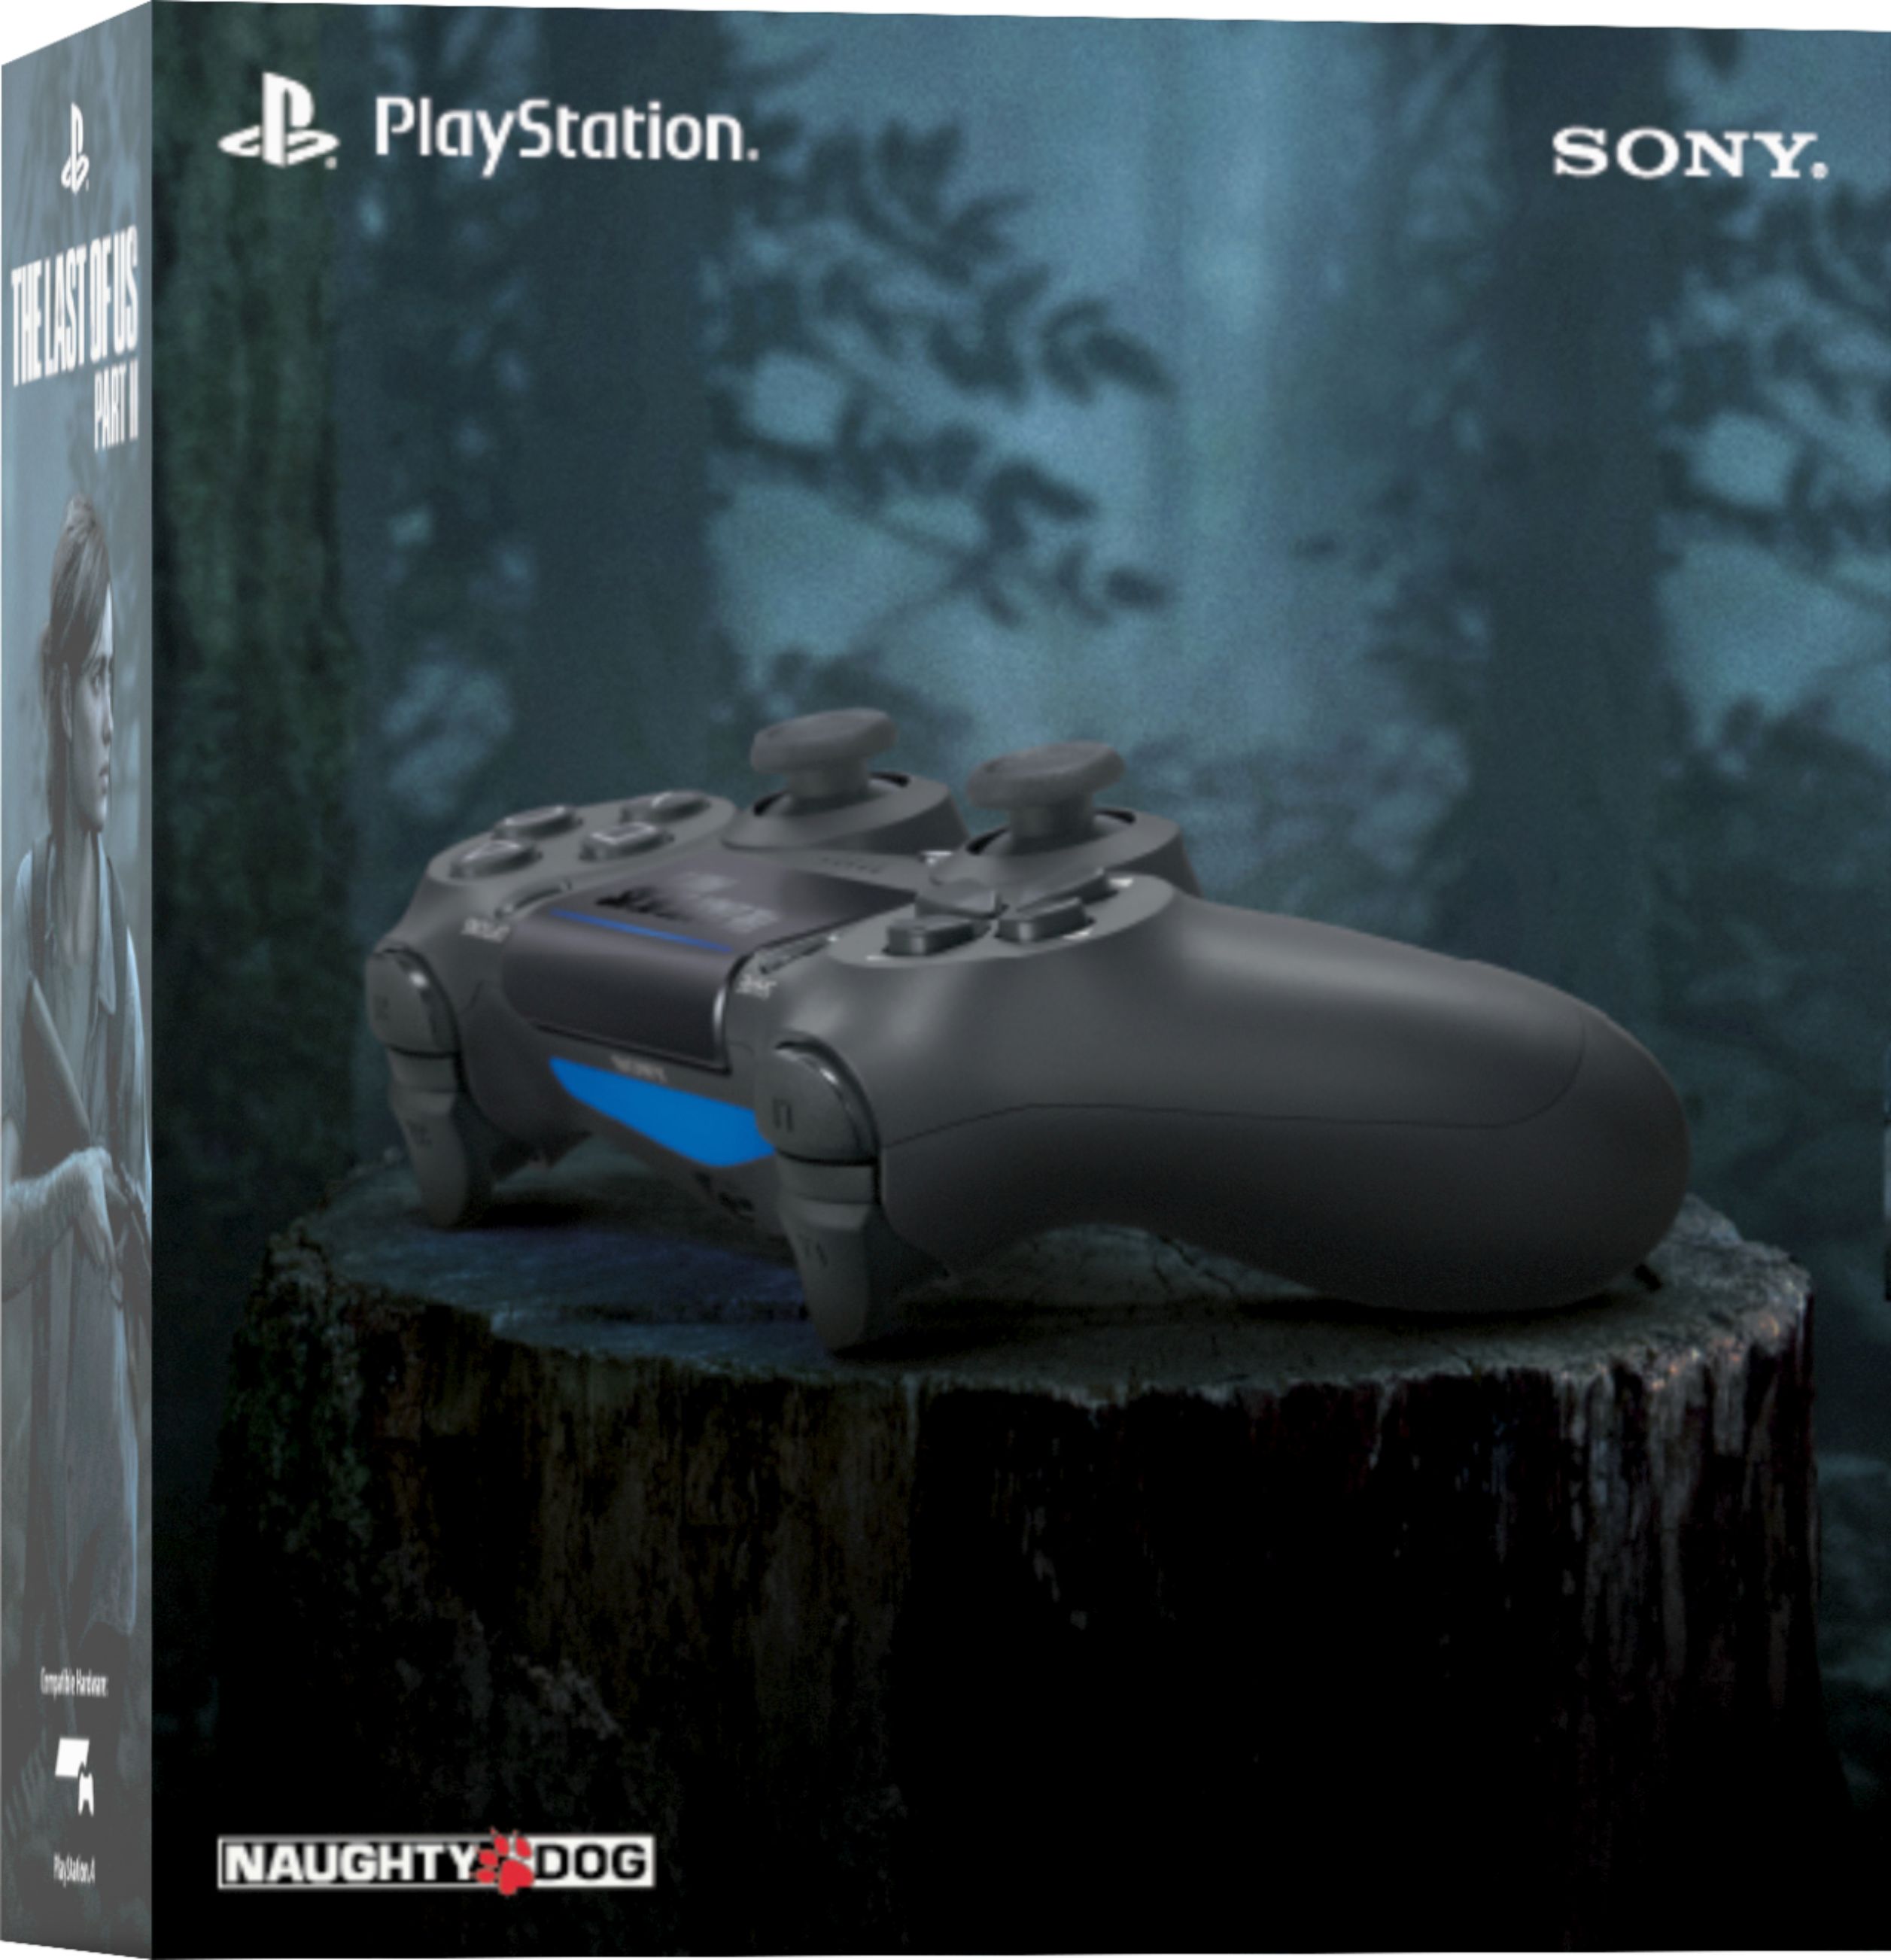 last of us two controller